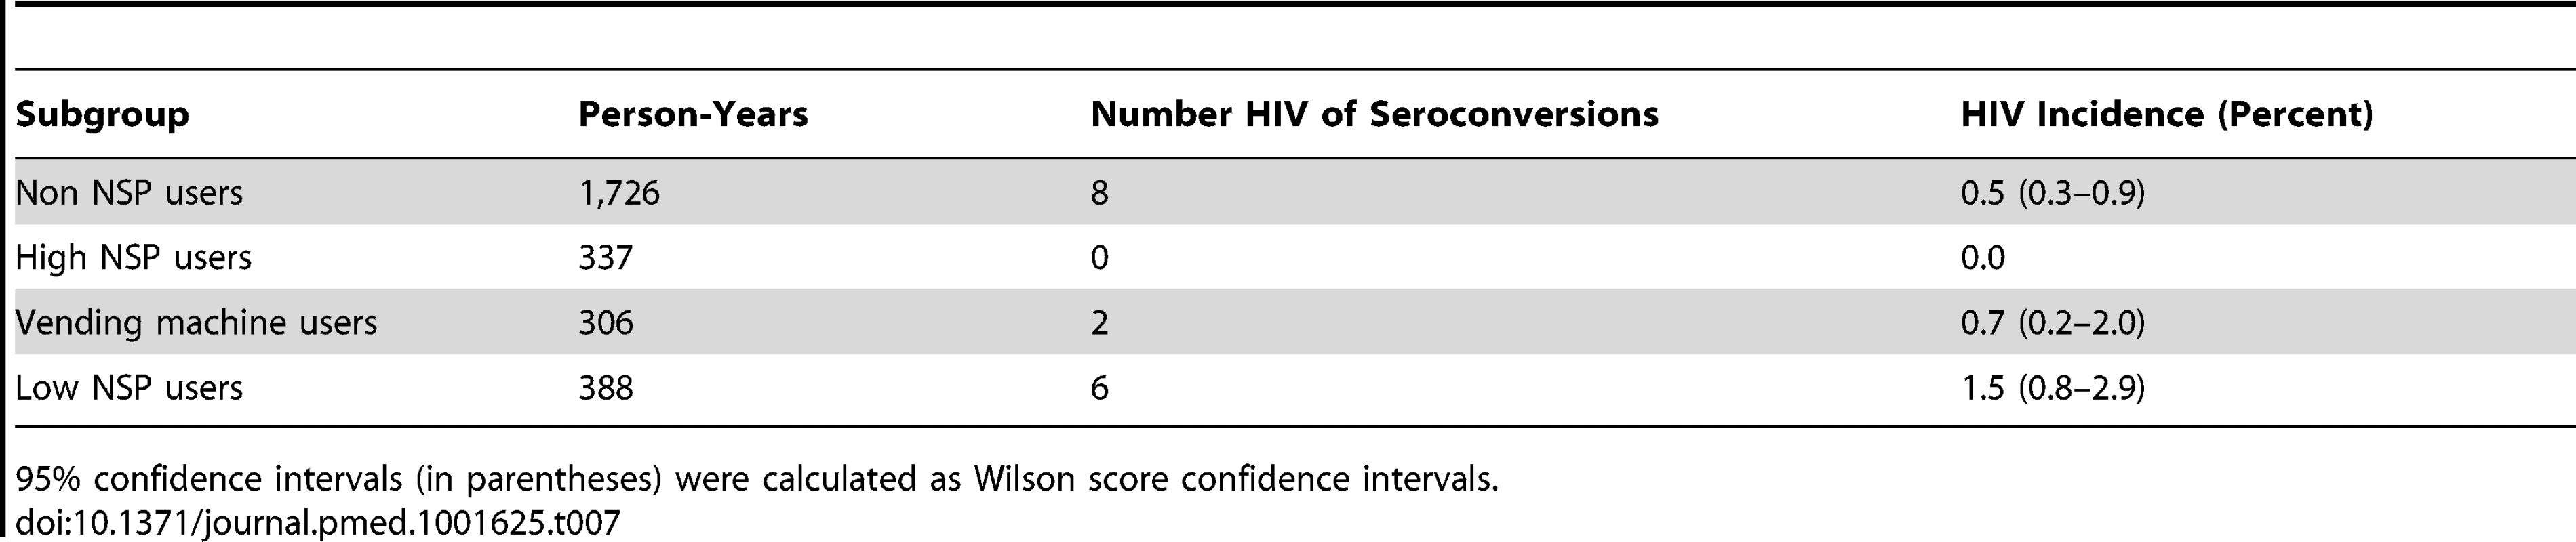 Crude HIV incidence rates among different NSP use subgroups.